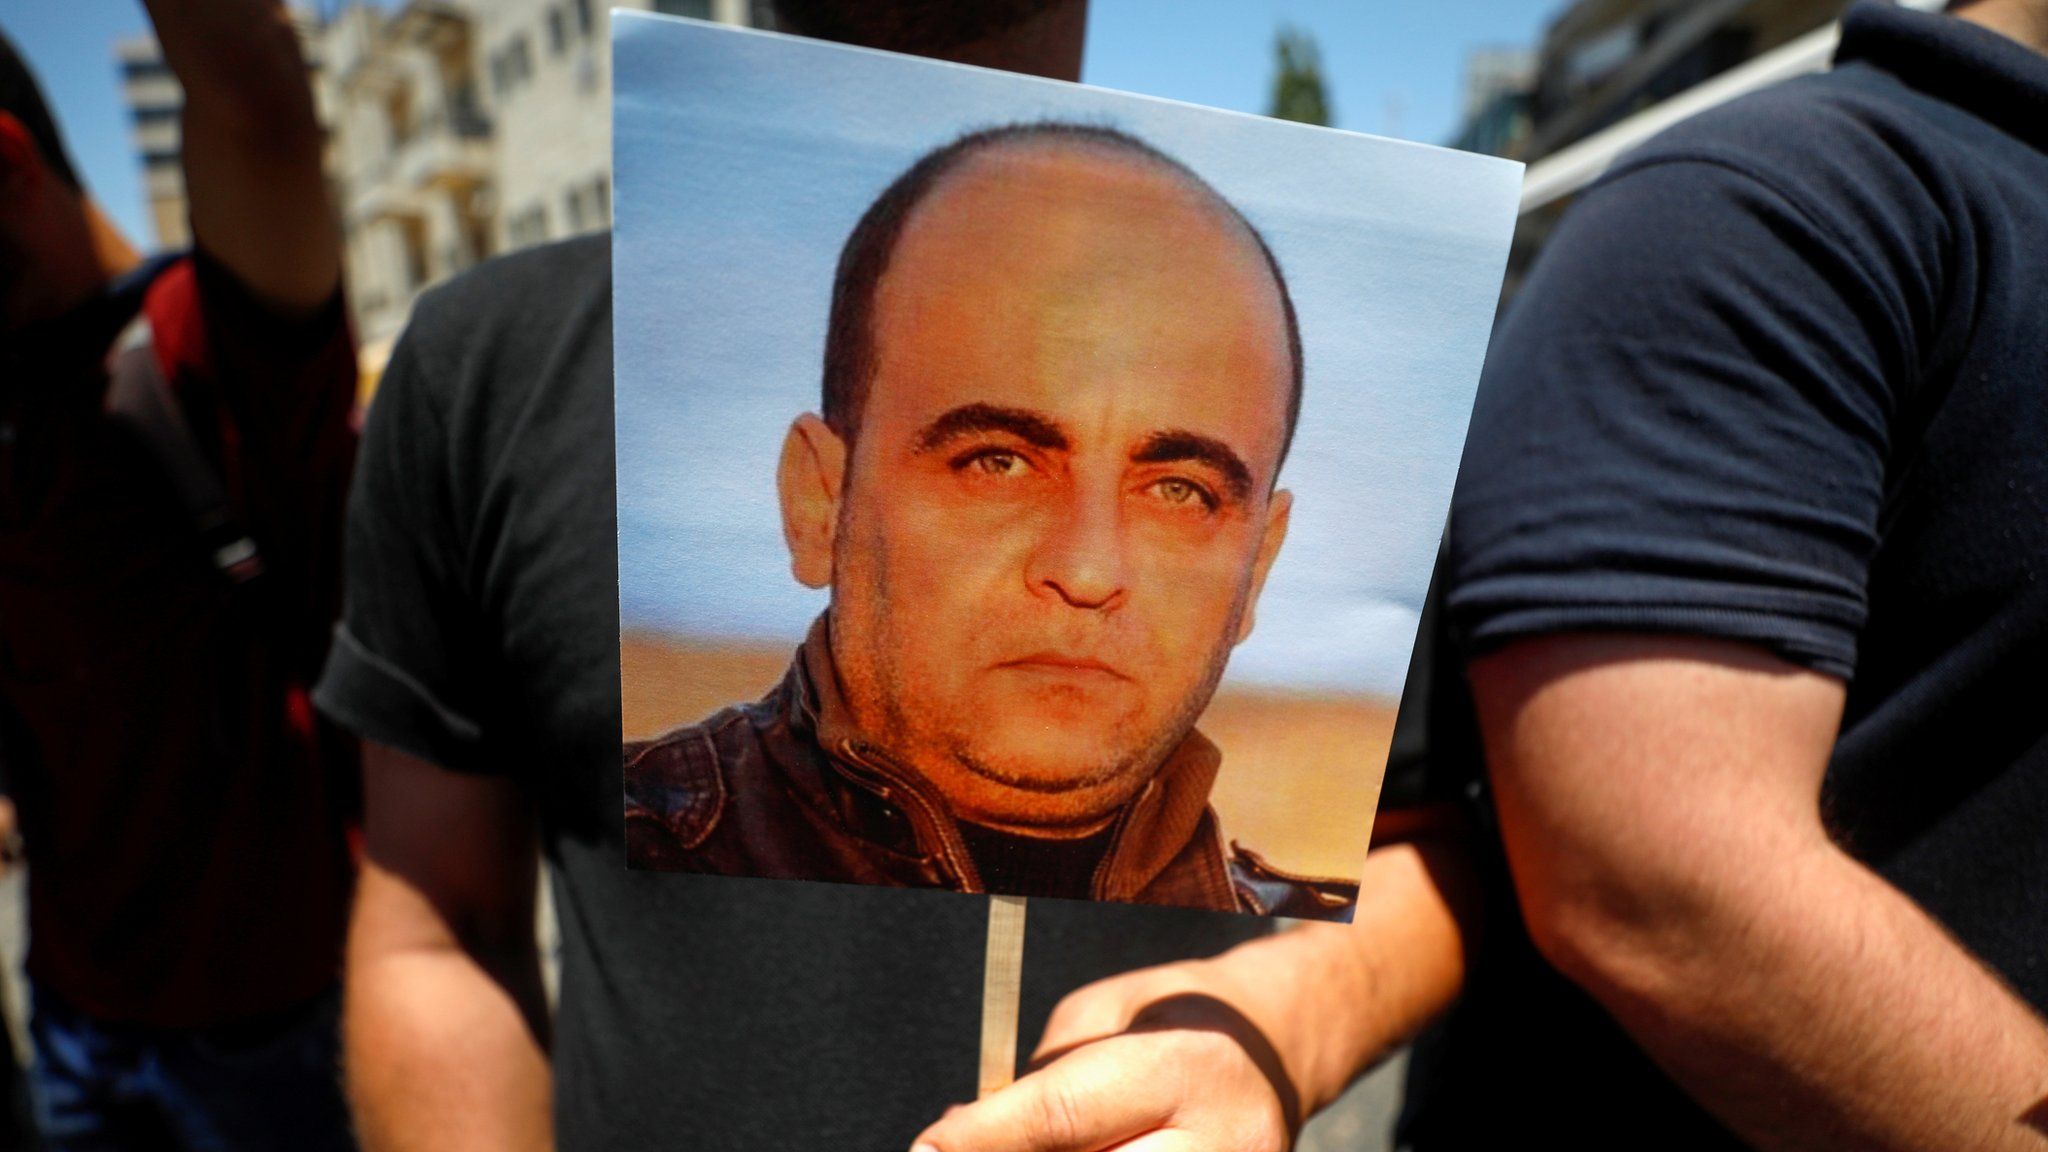 Palestinians protest against the death in custody of activist Nizar Banat in Ramallah, in the occupied West Bank (24 June 2021)